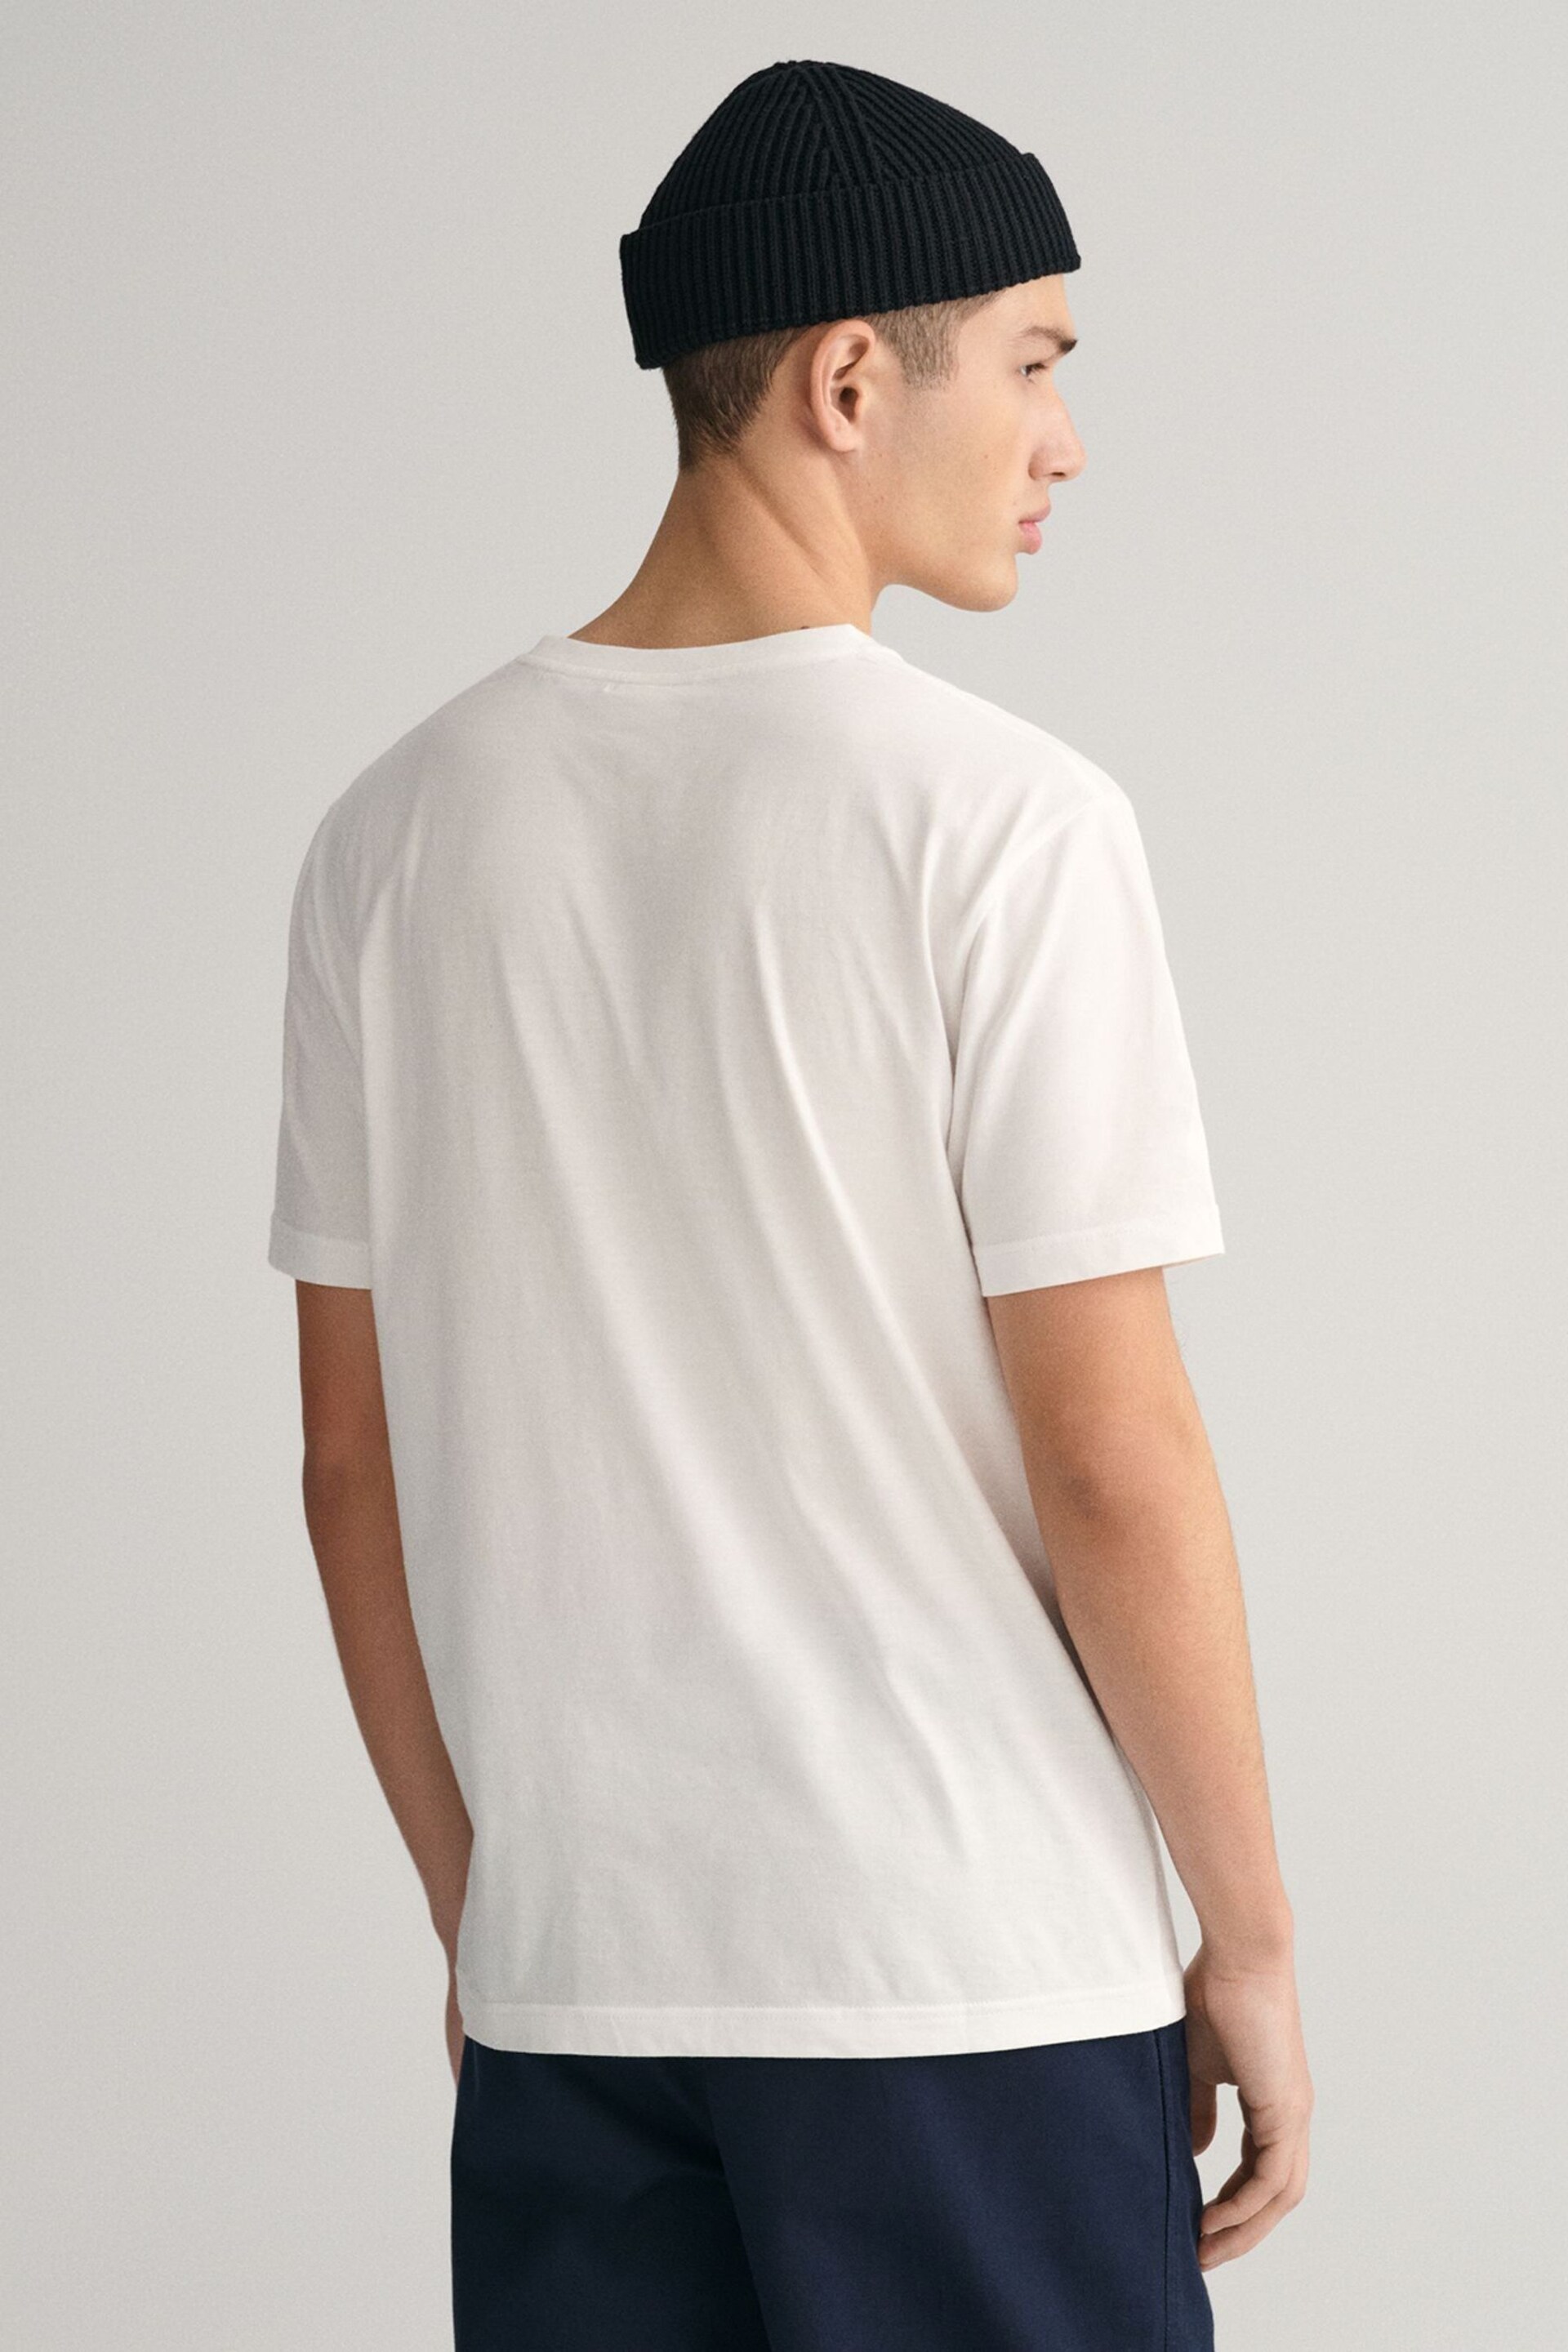 GANT White Embroidered Archive Shield T-Shirt - Image 2 of 4